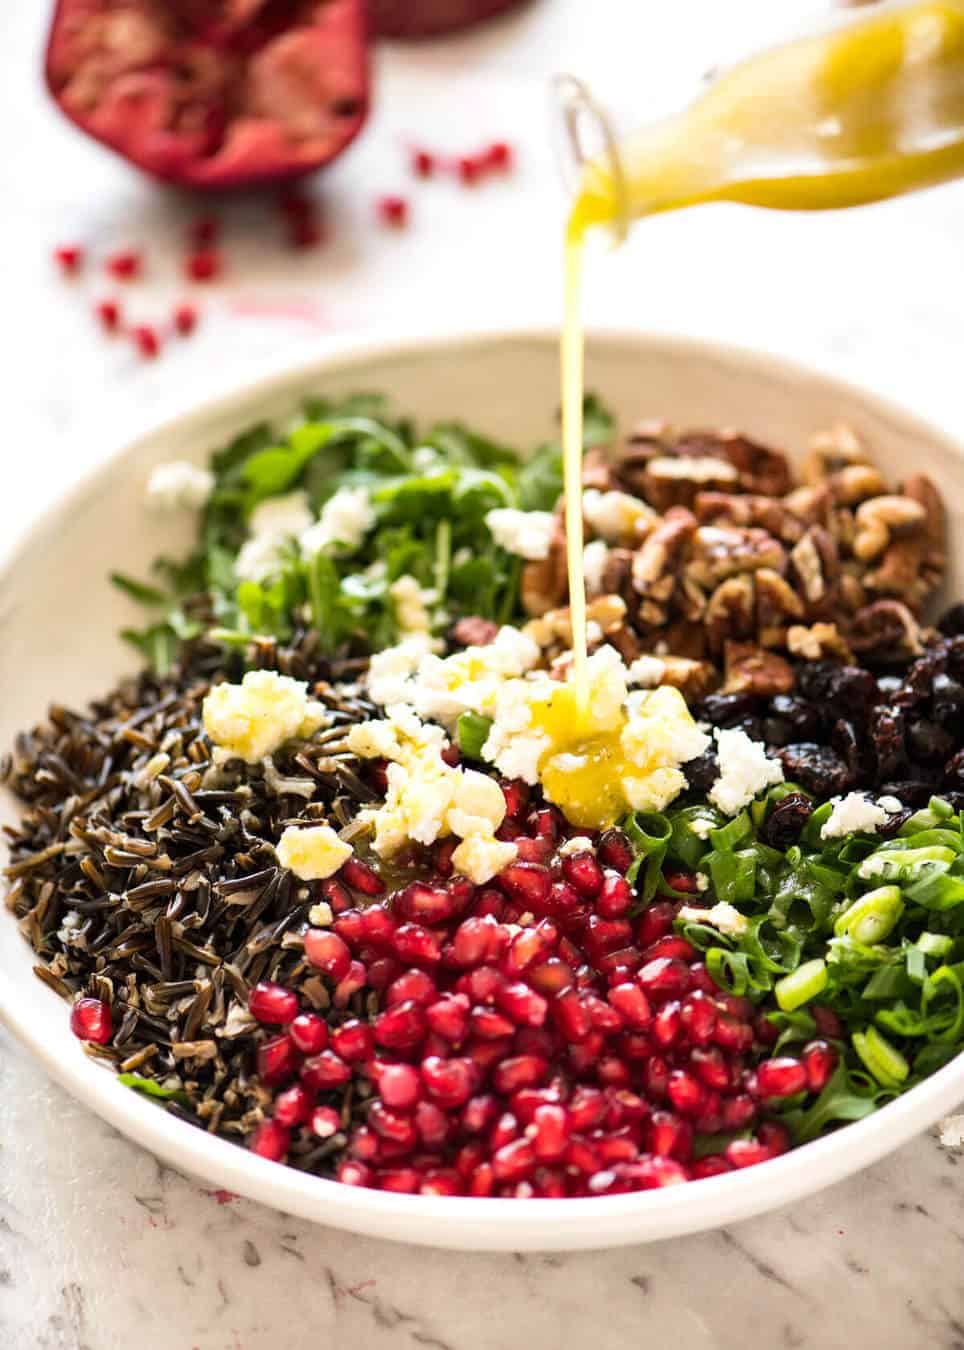 A simple white wine vinaigrette is the perfect Wild Rice Salad dressing. www.recipetineats.com